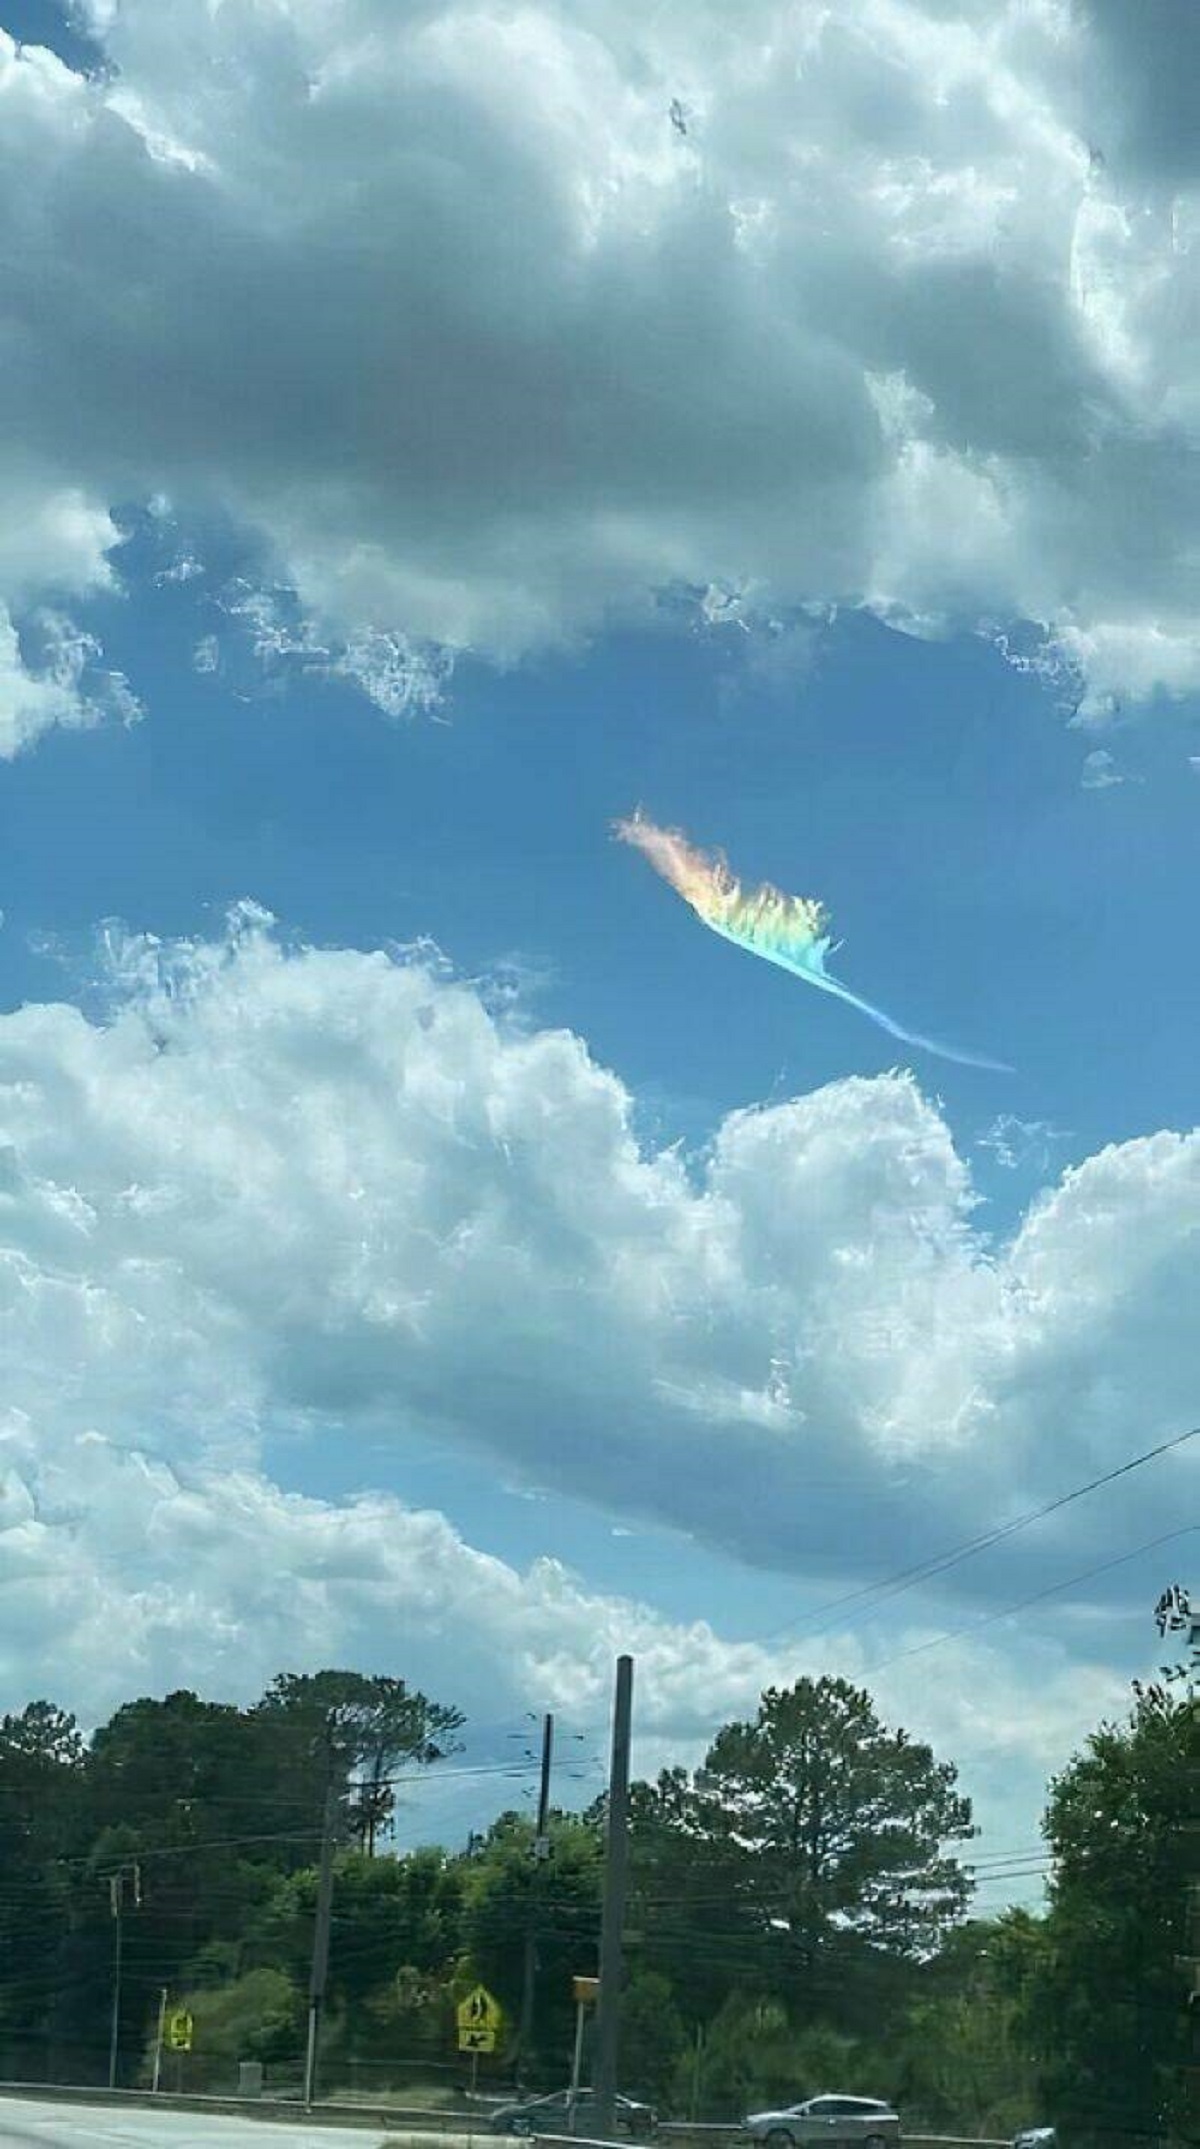 "This Very Rare Form Of Rainbow - Sometimes Called A Fire Rainbow - Is Caused By The Angle Of The Sunlight Hitting Cirrus Ice Crystals In The Atmosphere"